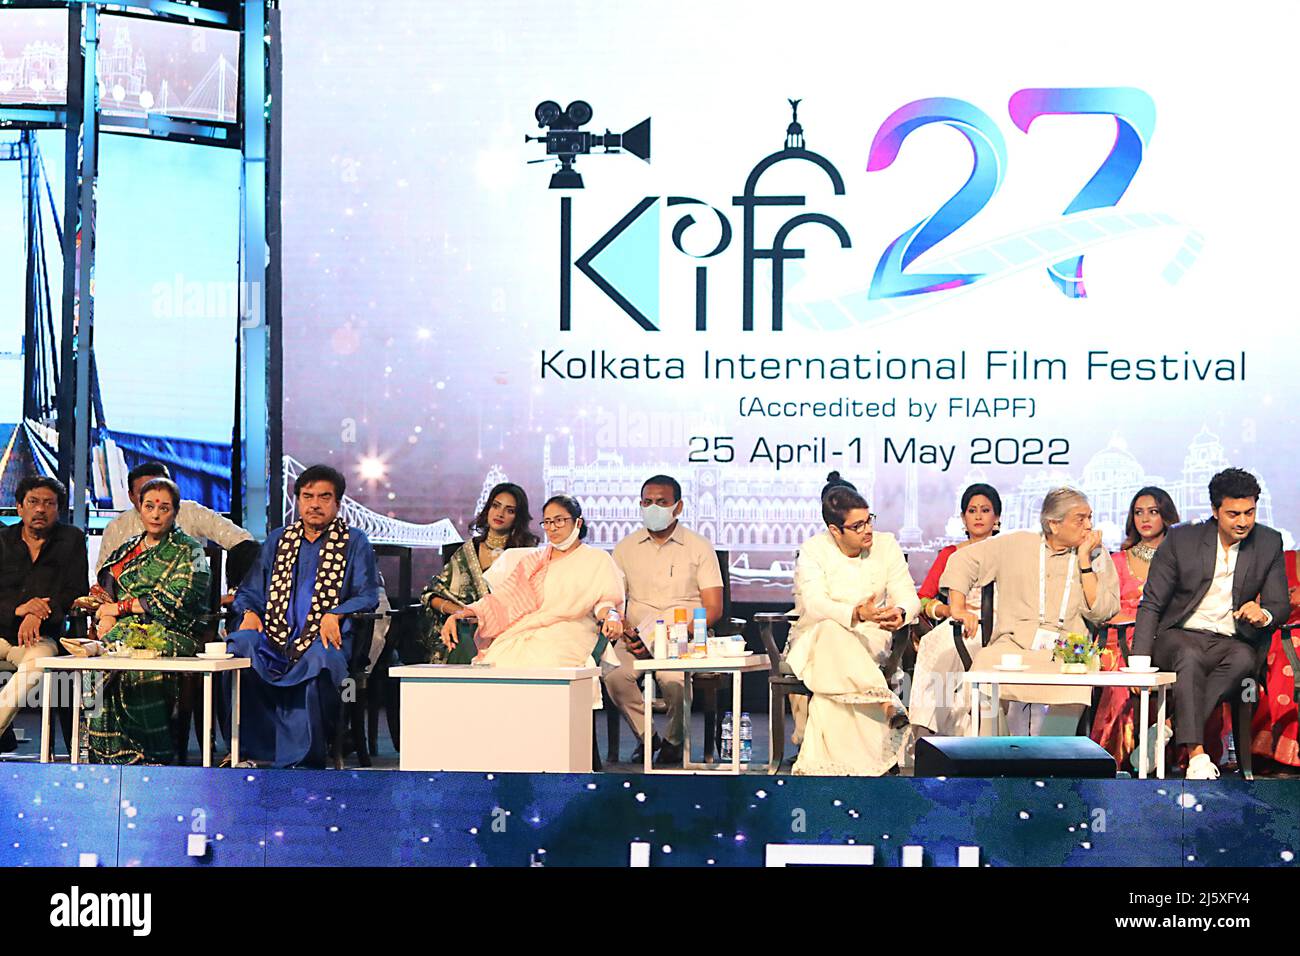 Kolkata, West Bengal, India. 25th Apr, 2022. 27th Kolkata International Film festival at Nazrul Mancha on April 25, 2022 in Kolkata, India.The festival will also offer a centenary tribute to Hungarian filmmaker Miklos Jancso and filmmaker and critic Chidananda Dasgupta. Finland is the focus country this year and about half-a-dozen films including Tove by Zaida Bergroth and The Other Side Of Hope by Aki Kaurismak will be screened.Actor-turned-politician Shatrughan Sinha, who was the chief guest at the inauguration, said he would remain a fan of Satyajit Ray and Raj Kapoor all his life. Mr. Si Stock Photo